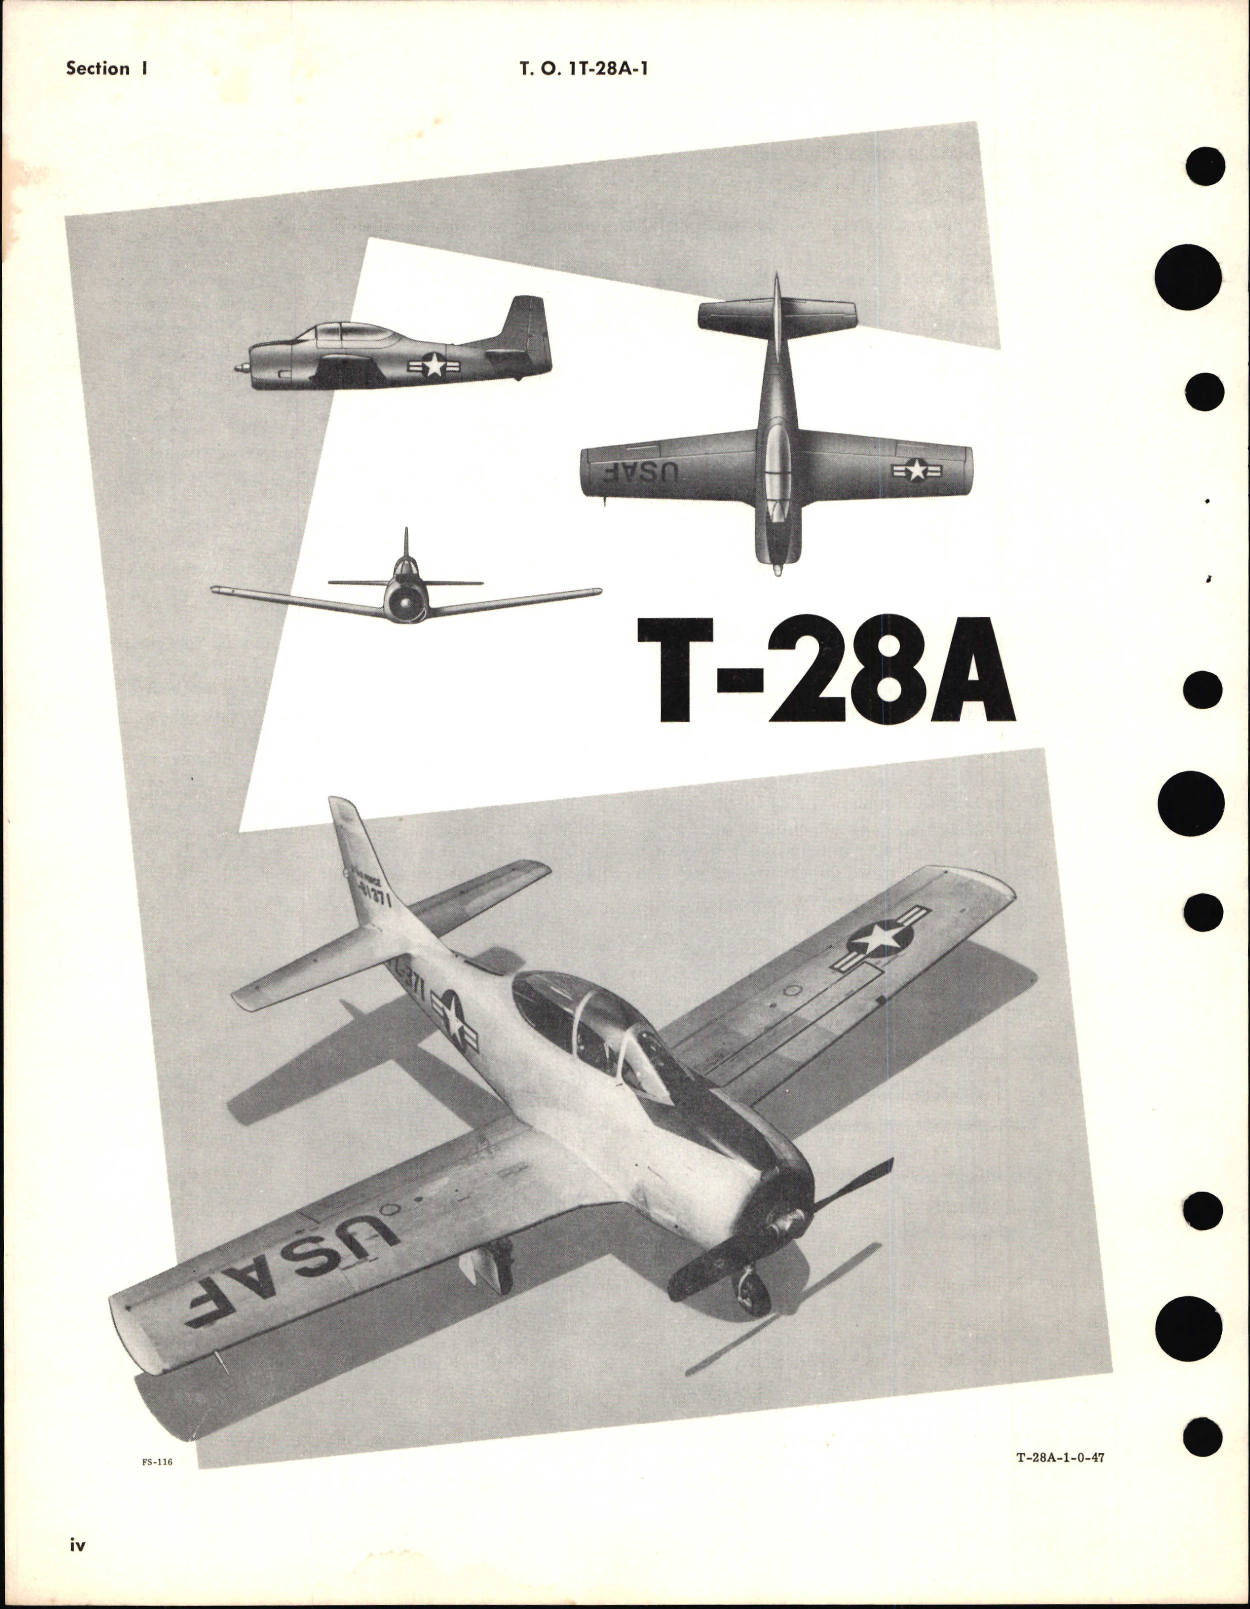 Sample page 6 from AirCorps Library document: Flight Manual for T-28A